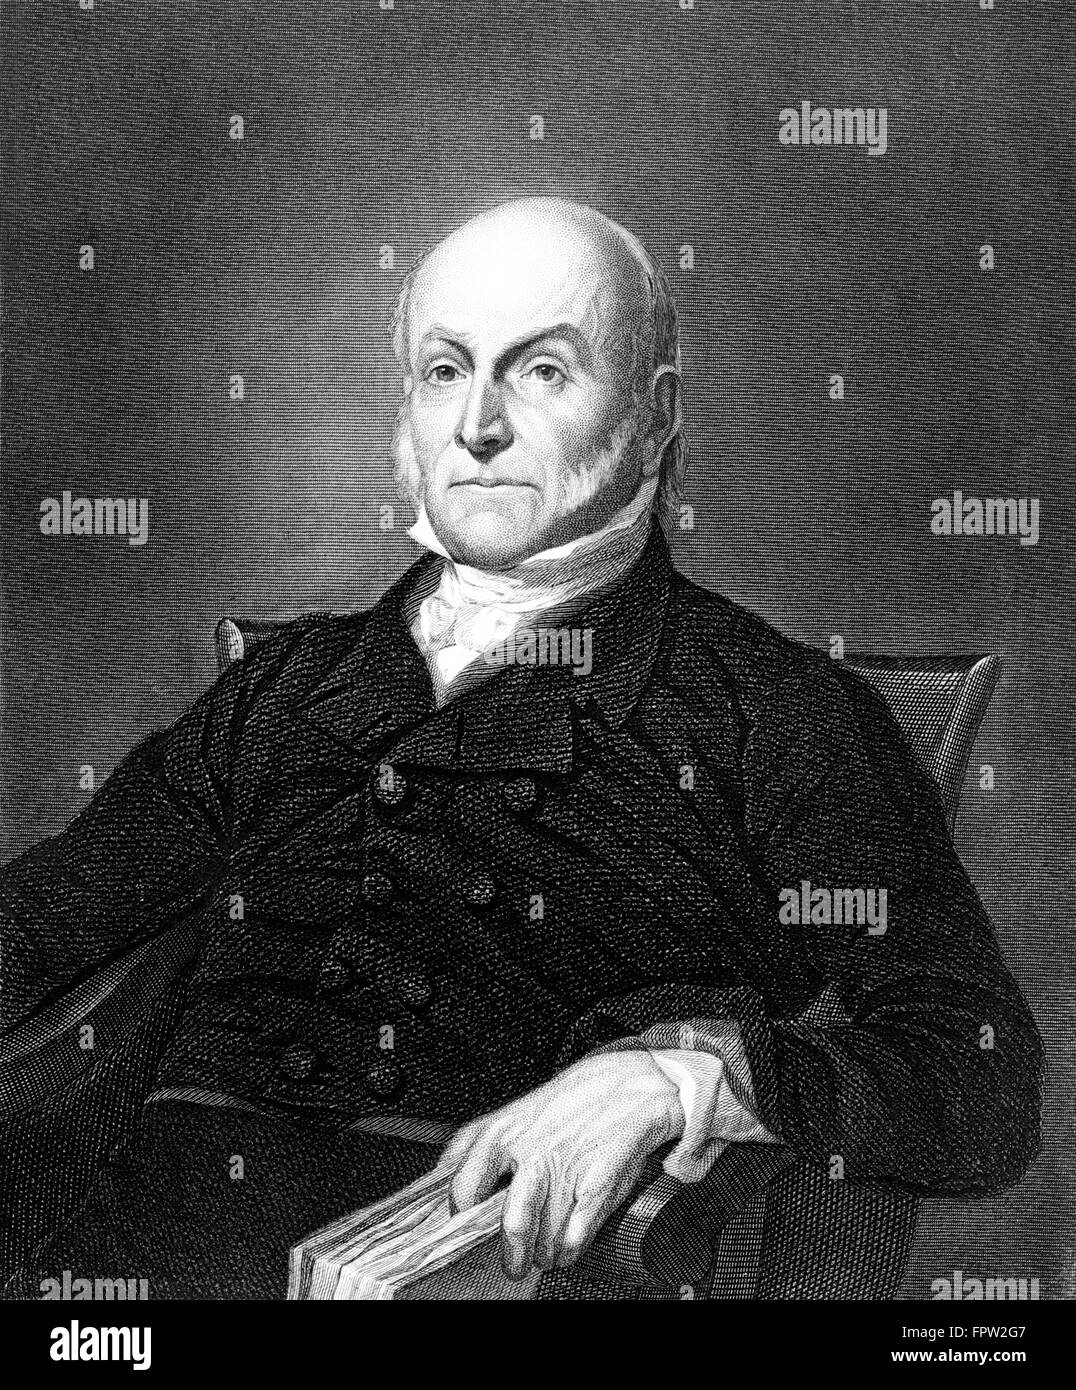 1800s JOHN QUINCY ADAMS 1767-1848 SIXTH 6th AMERICAN PRESIDENT FEDERALIST REPUBLICAN DIPLOMAT ATTORNEY FOR THE AMISTAD SLAVES Stock Photo